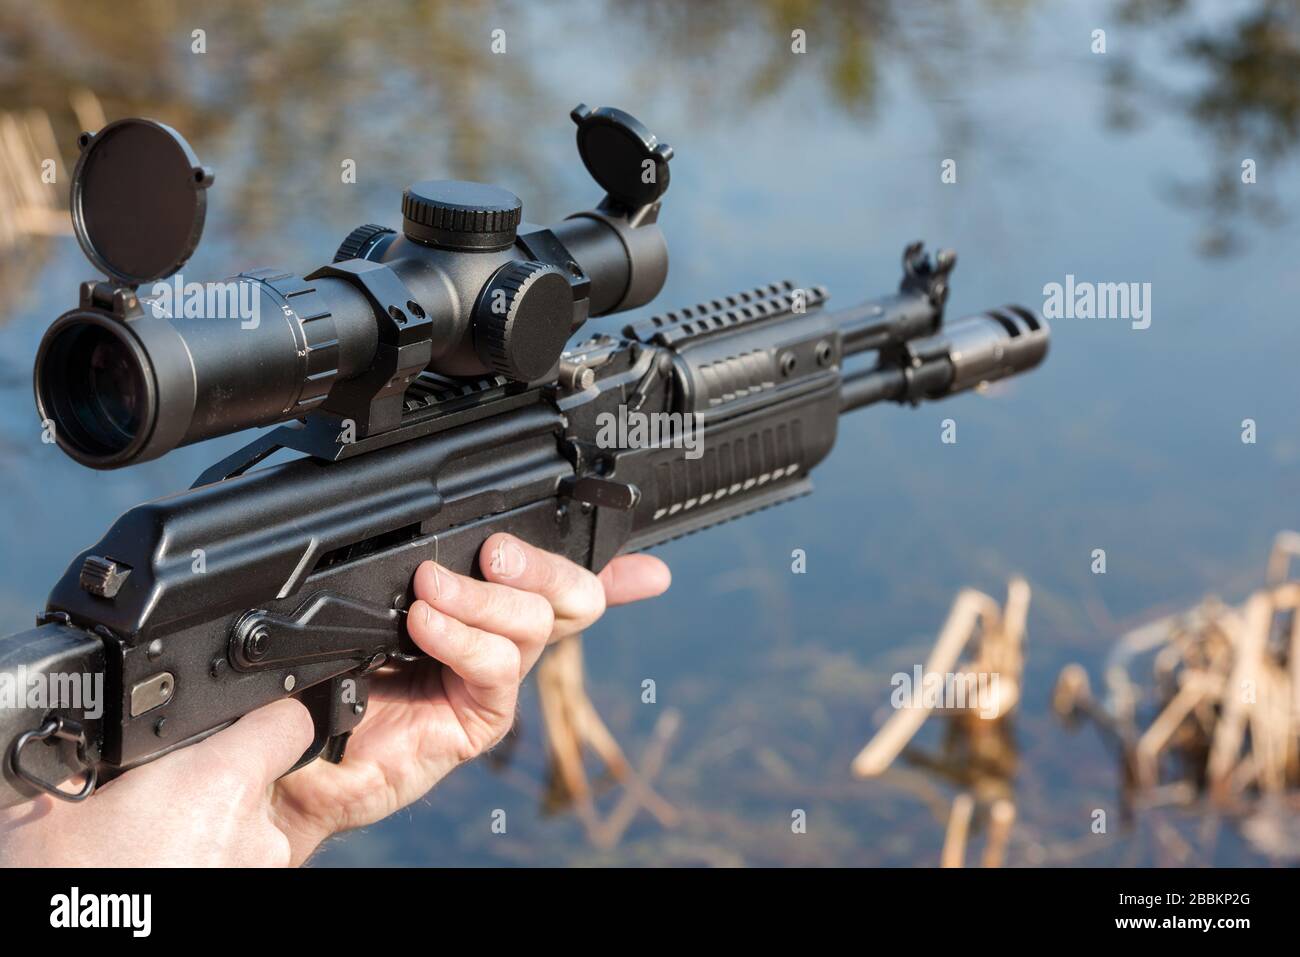 A man is holding a rifle Stock Photo